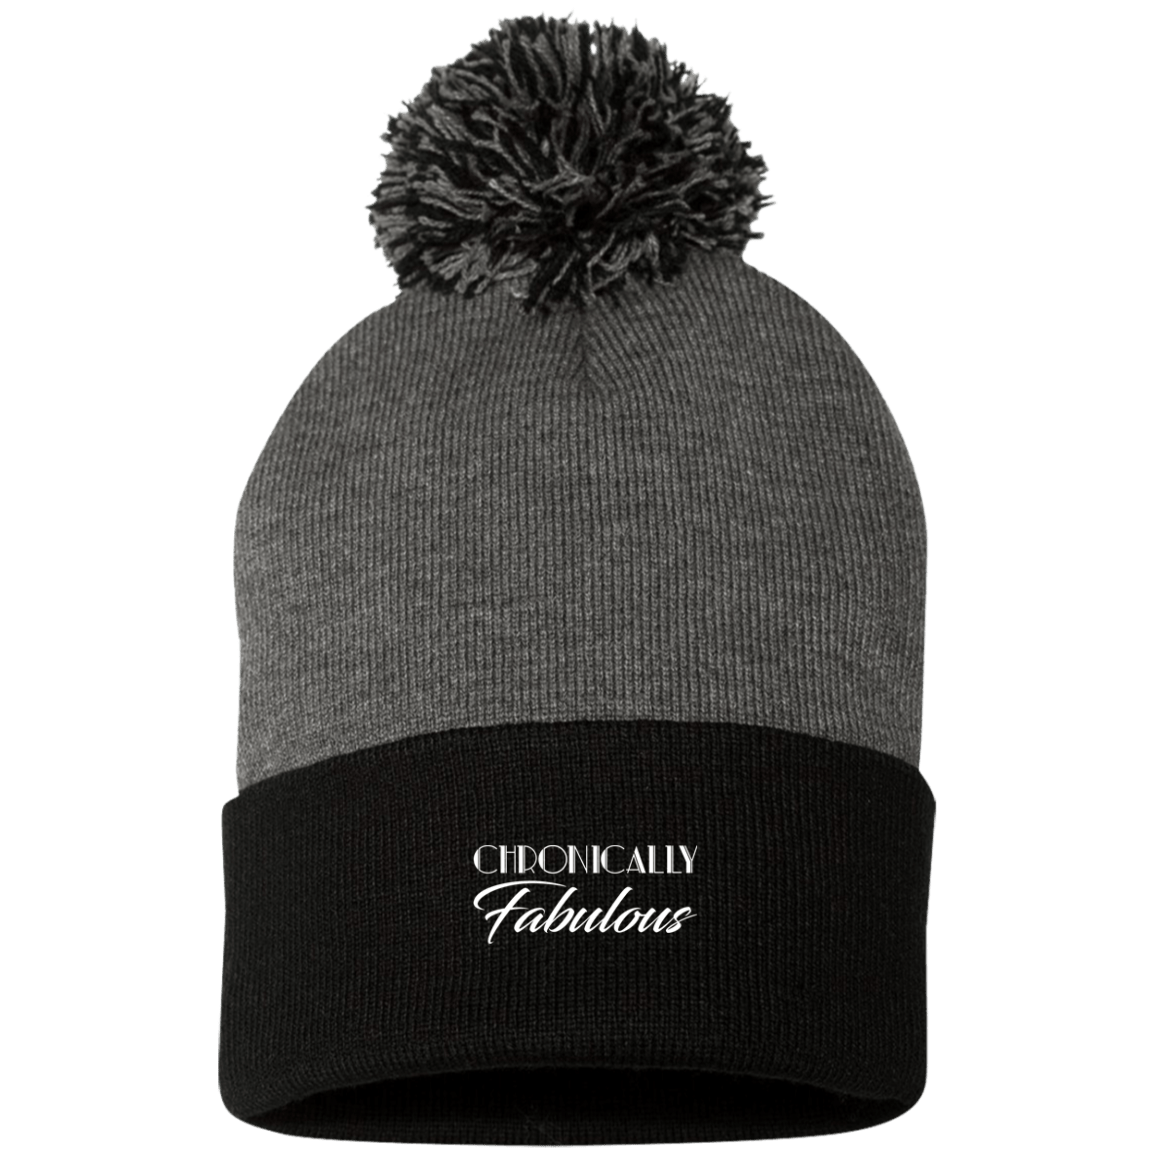 Chronically Fabulous Pom Pom Knit Cap - The Unchargeables